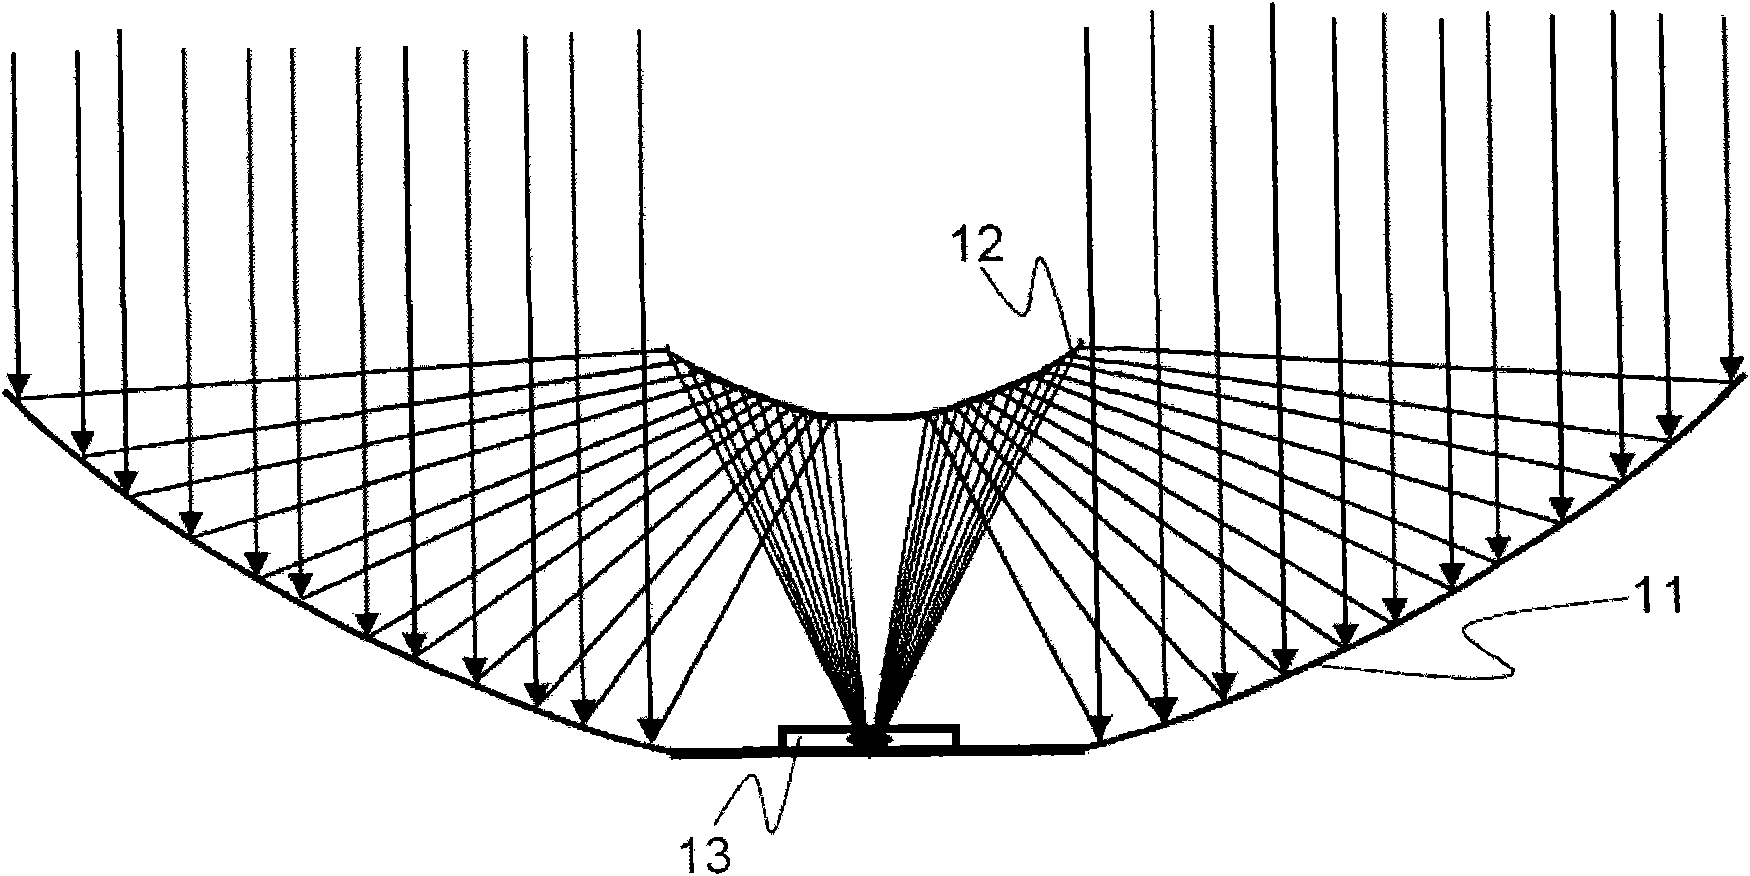 Three-dimensional concentrating solar cell system